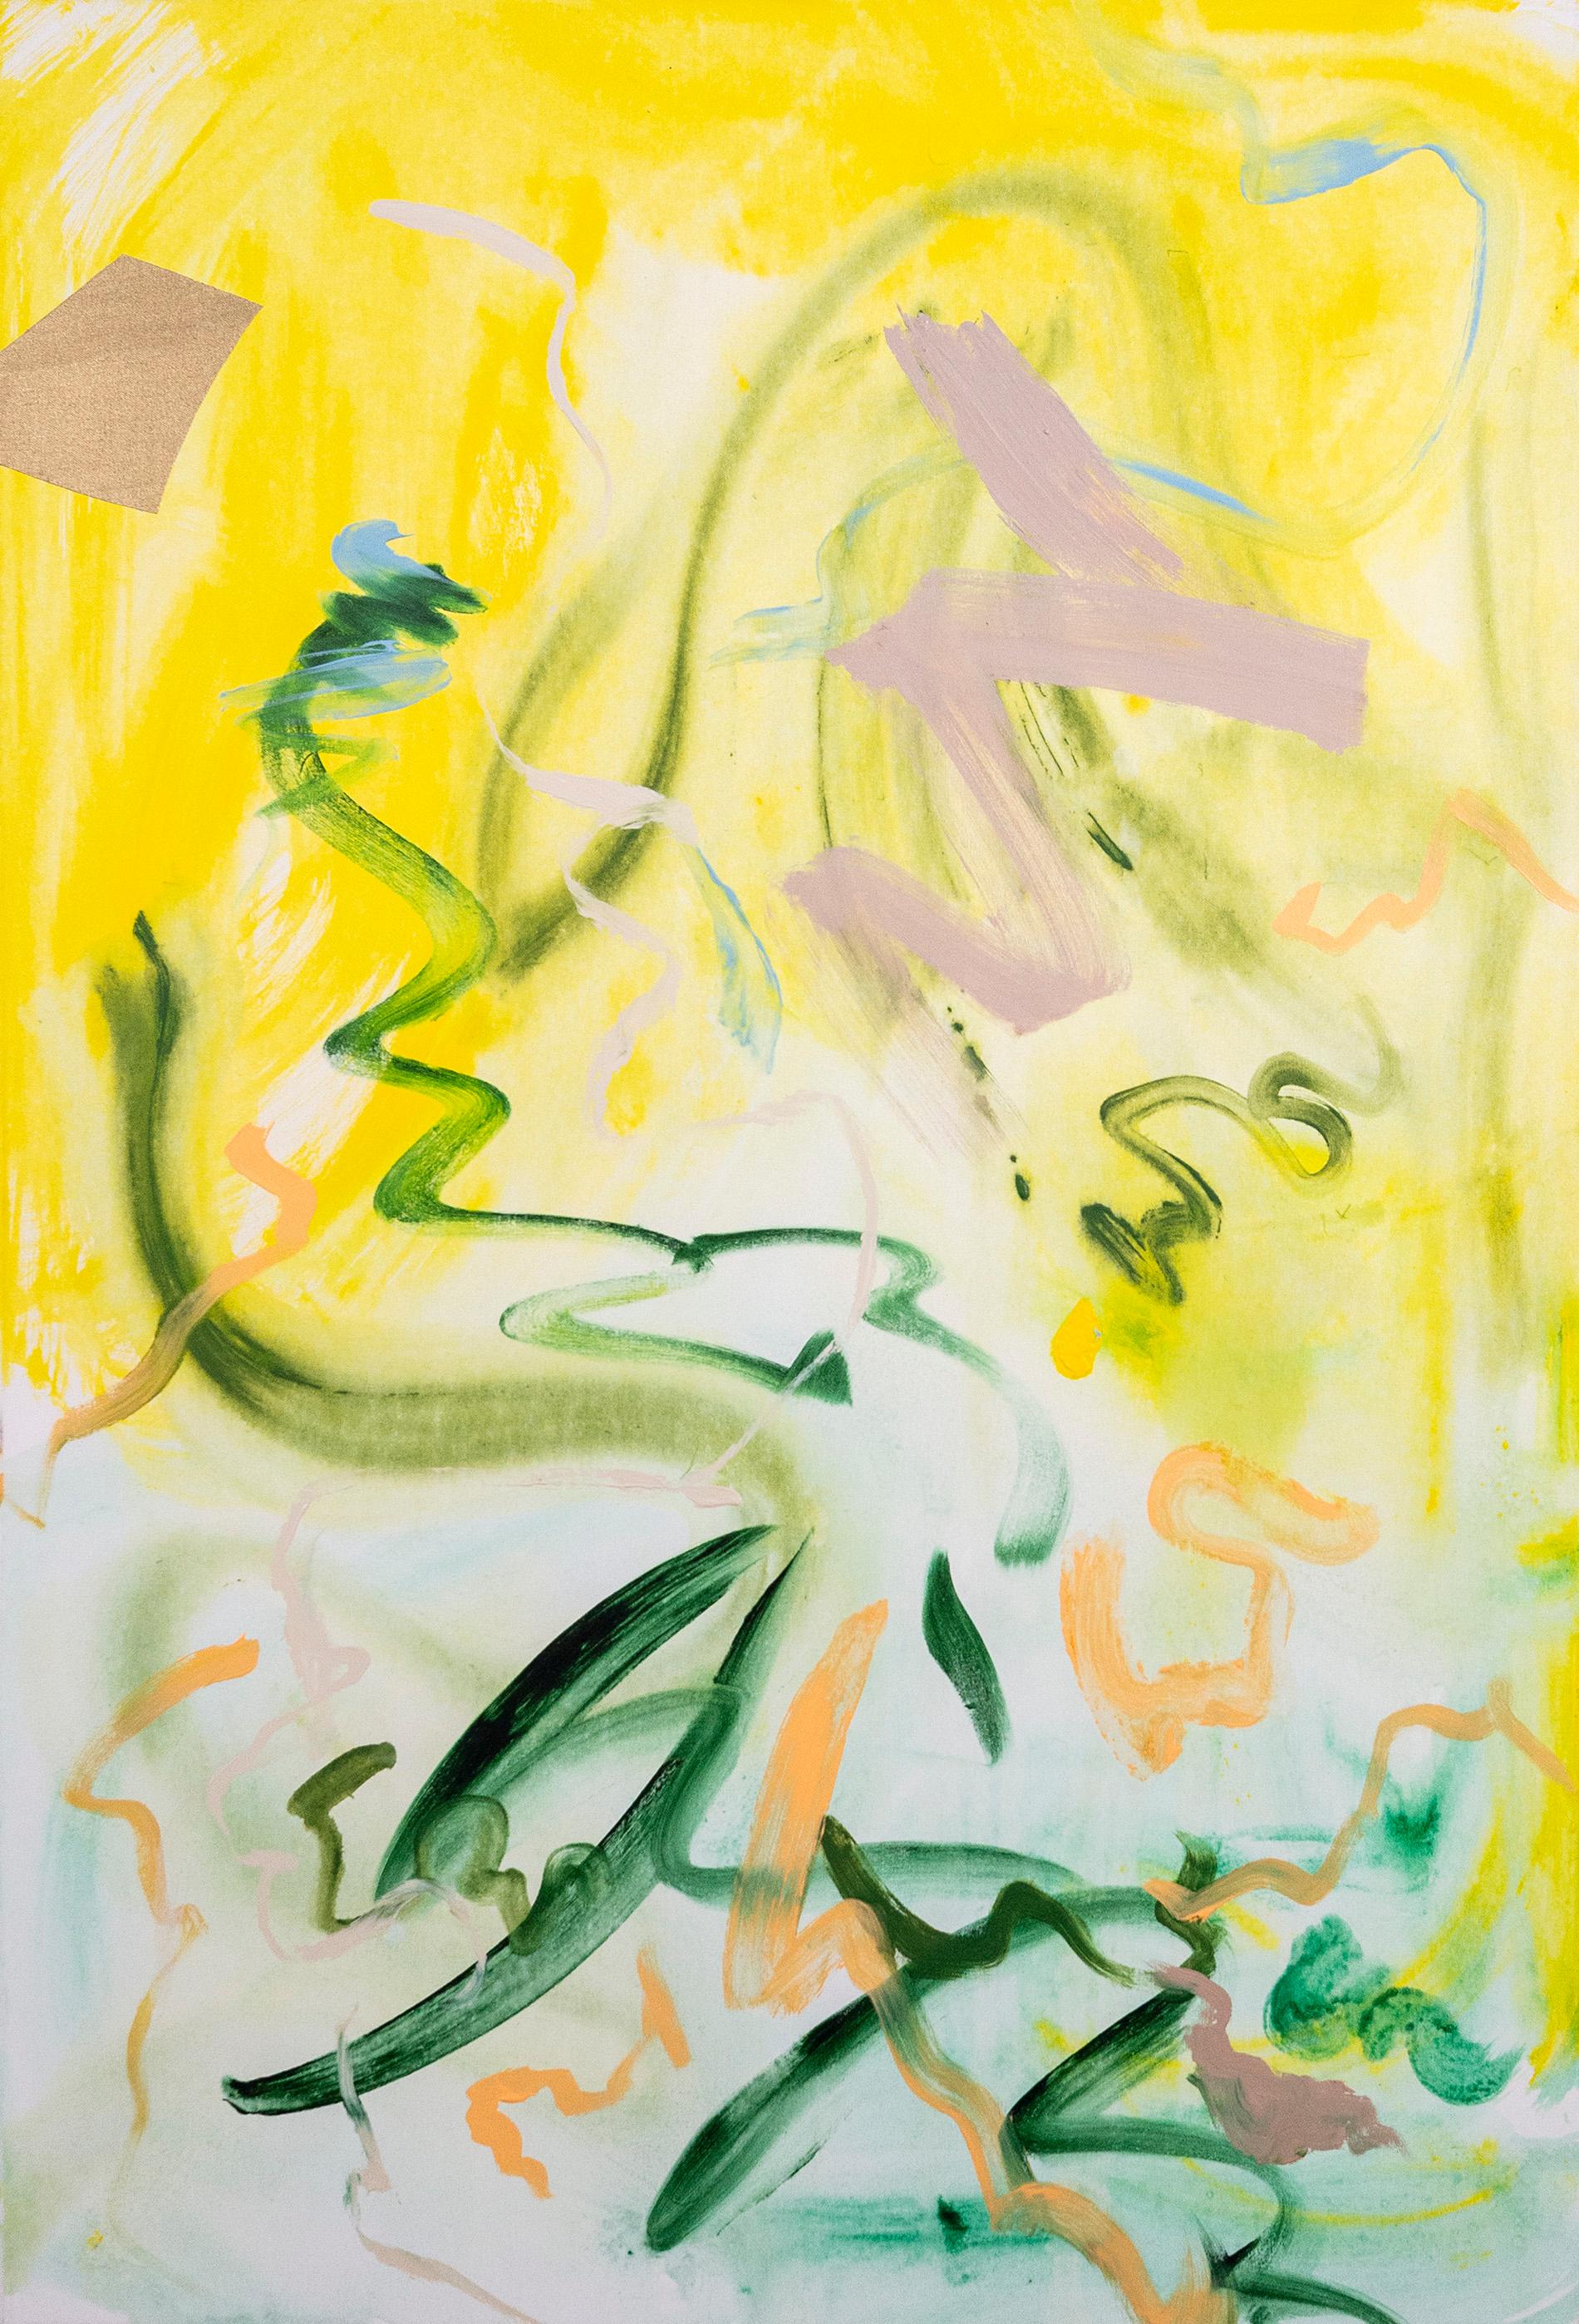 Angela Letizia Renzi & Richard Tosczak Abstract Painting - The Dancing Satyr - bright, colorful, gestural, abstract, acrylic on canvas